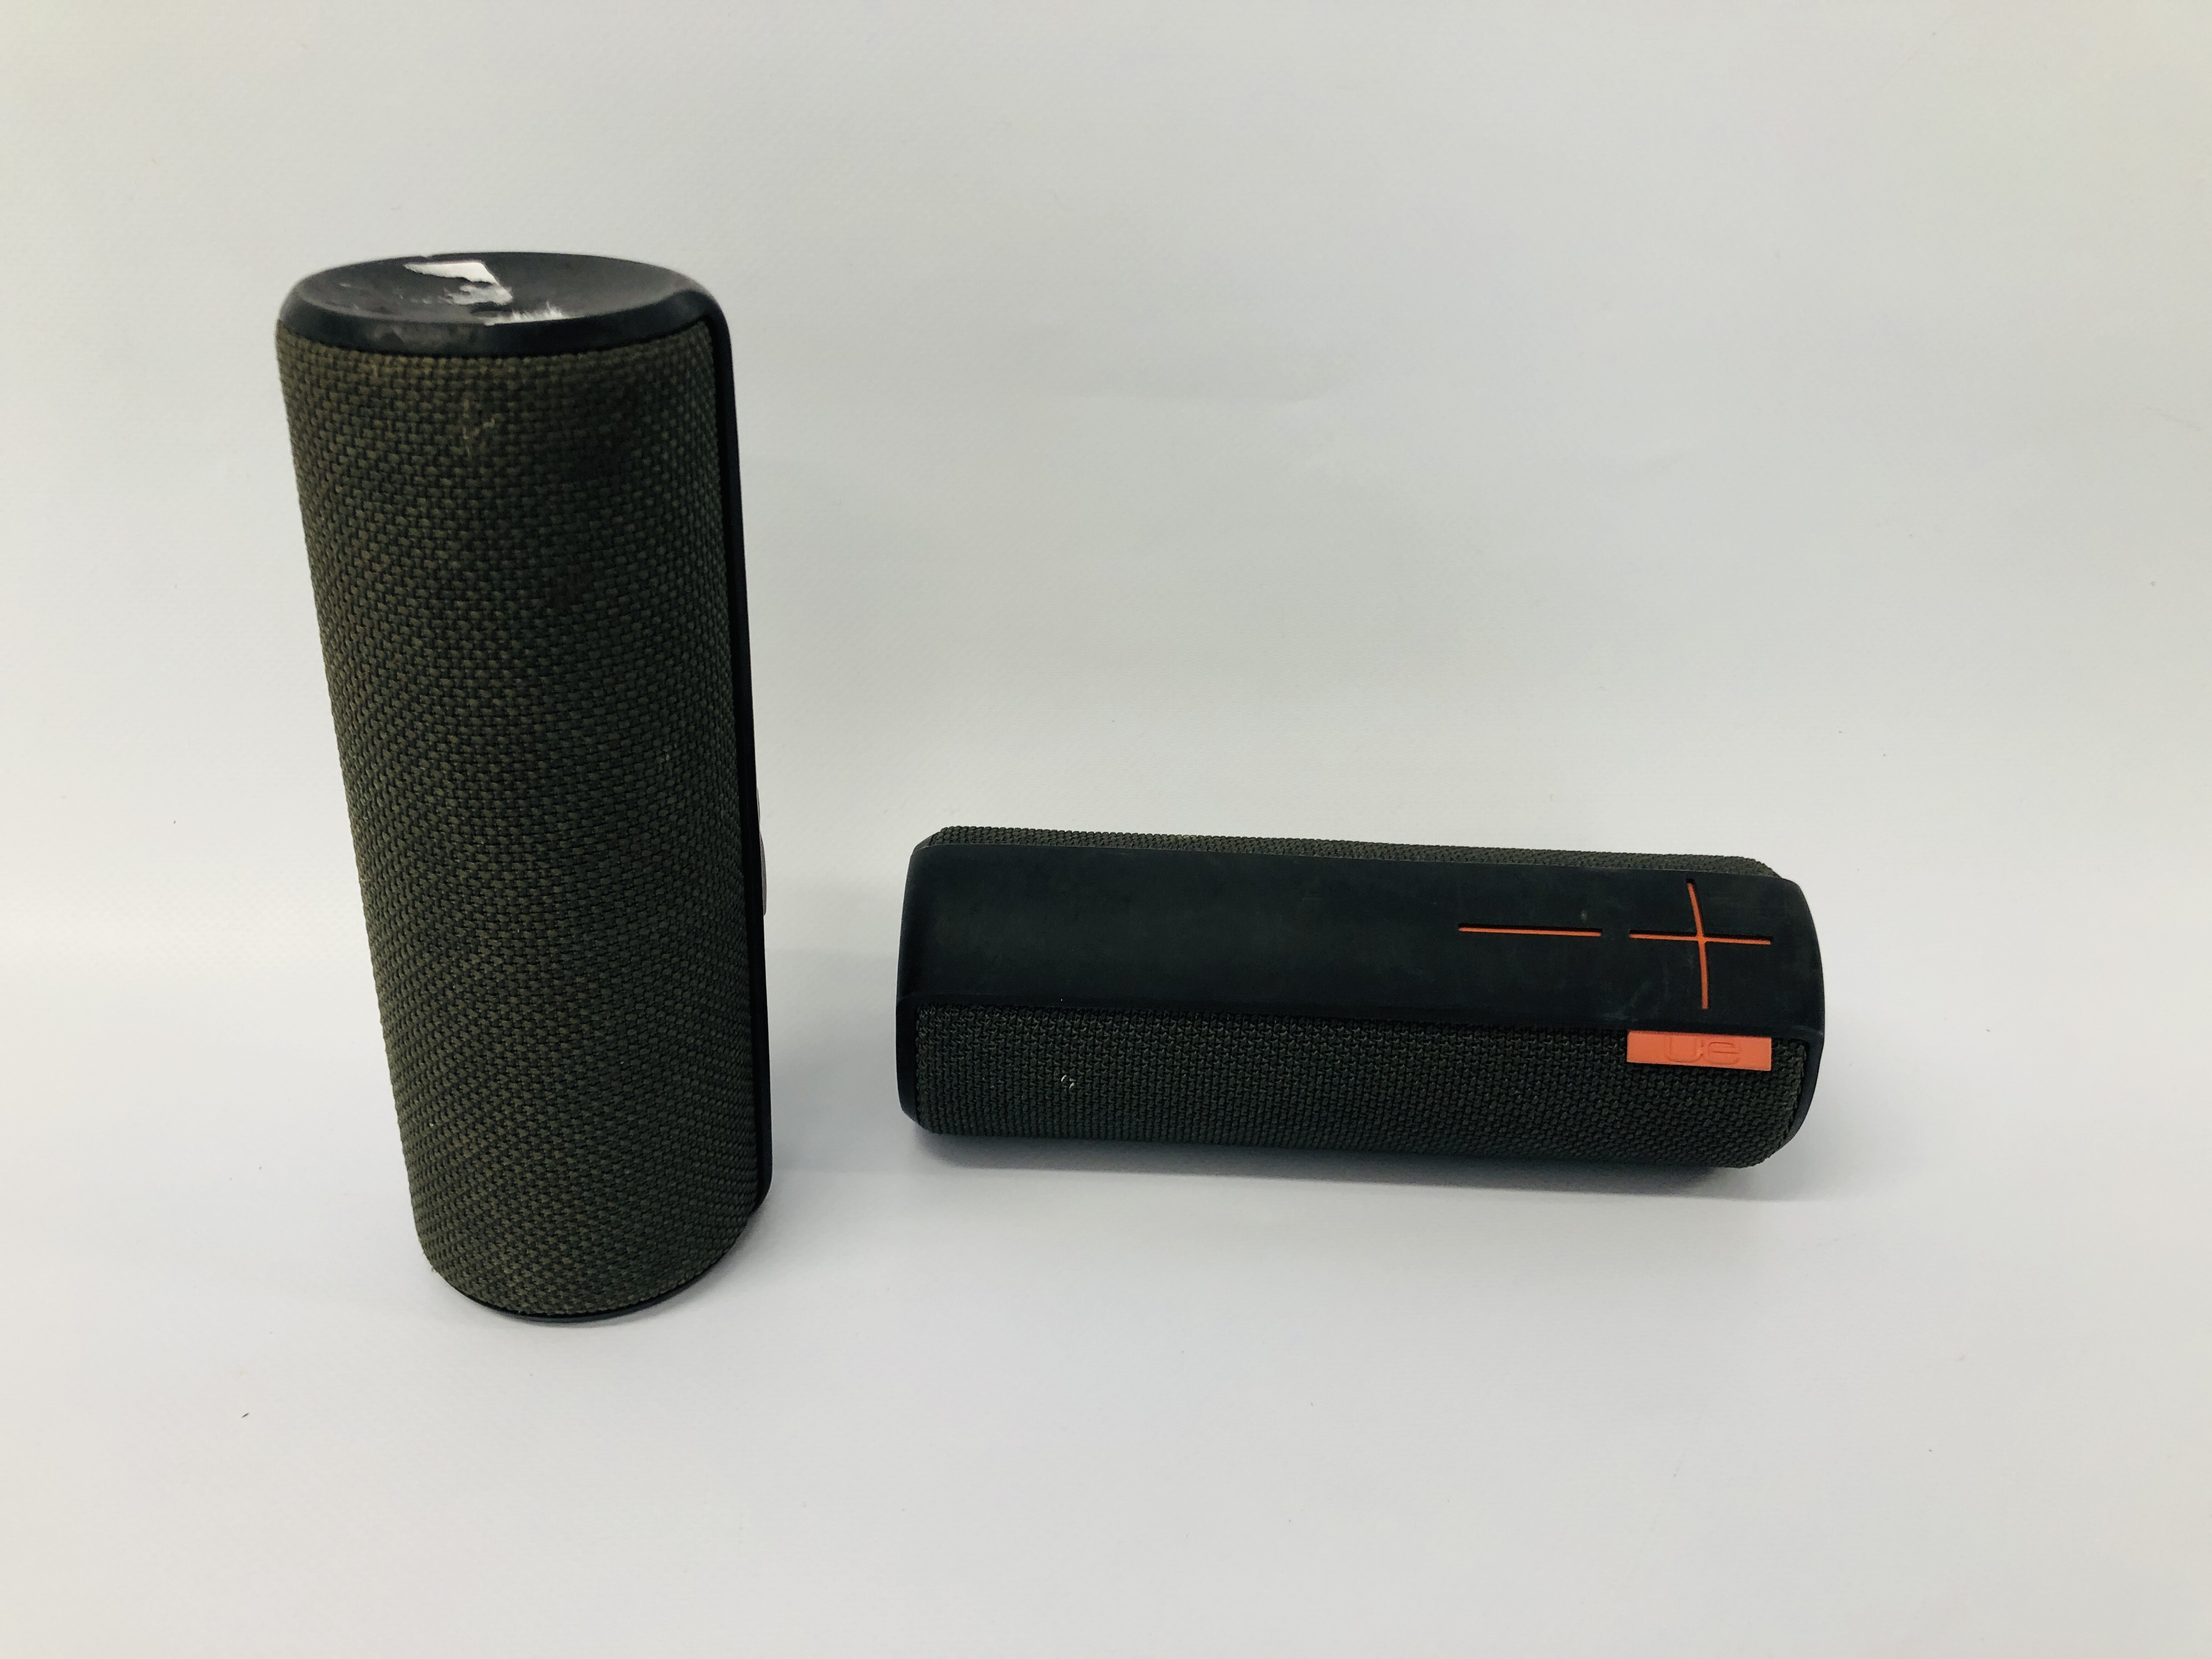 2 X UE BOOM PORTABLE BLUETOOTH SPEAKERS - NO GUARANTEE OF CONNECTIVITY. SOLD AS SEEN.